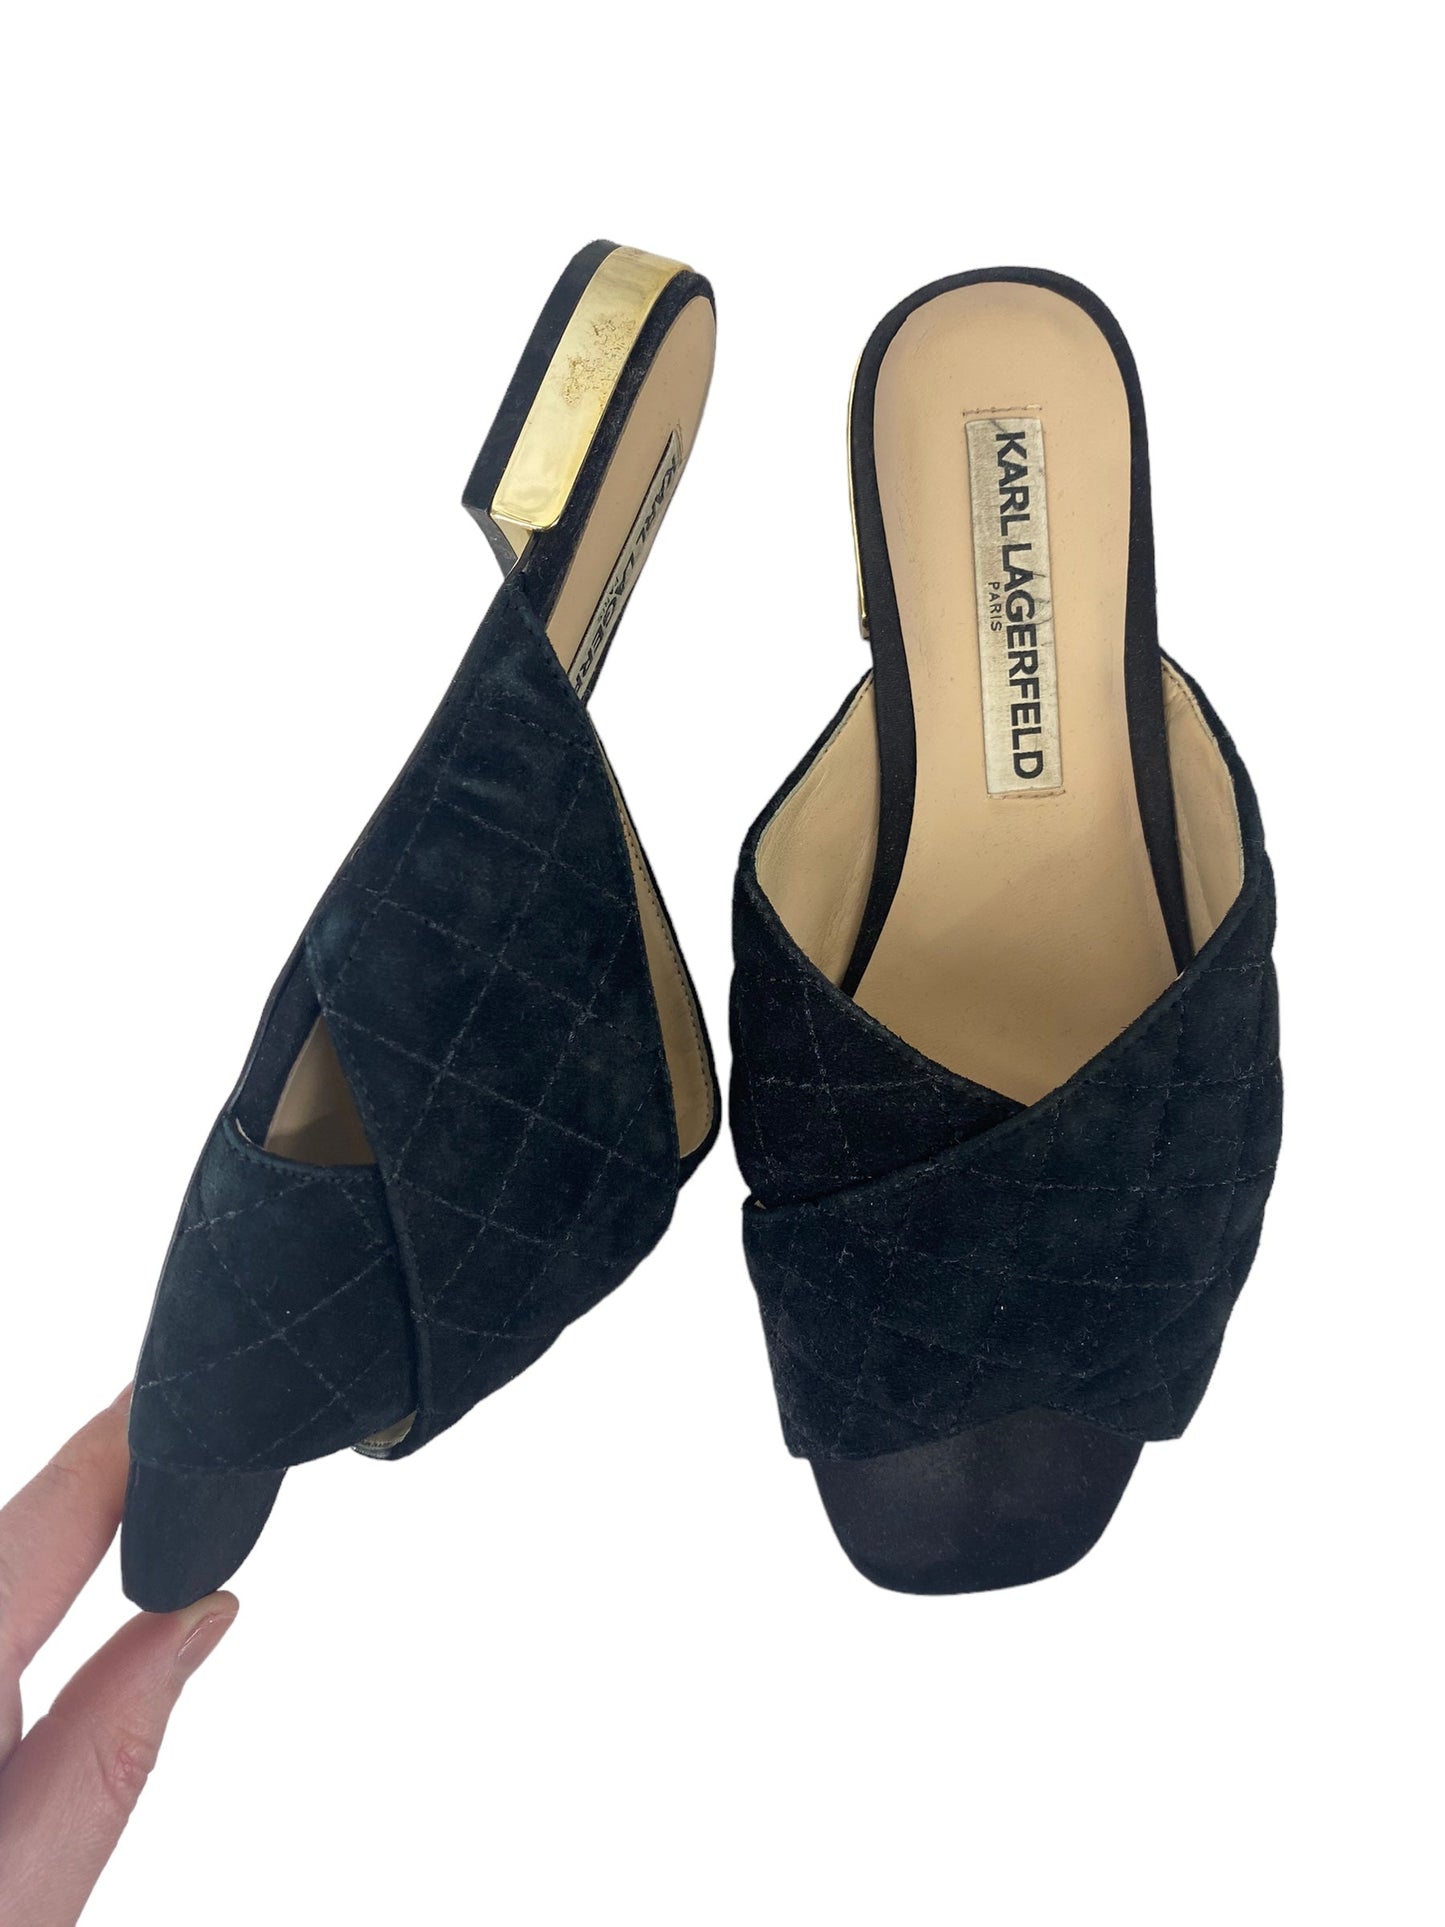 Sandals Flats By Karl Lagerfeld  Size: 6.5